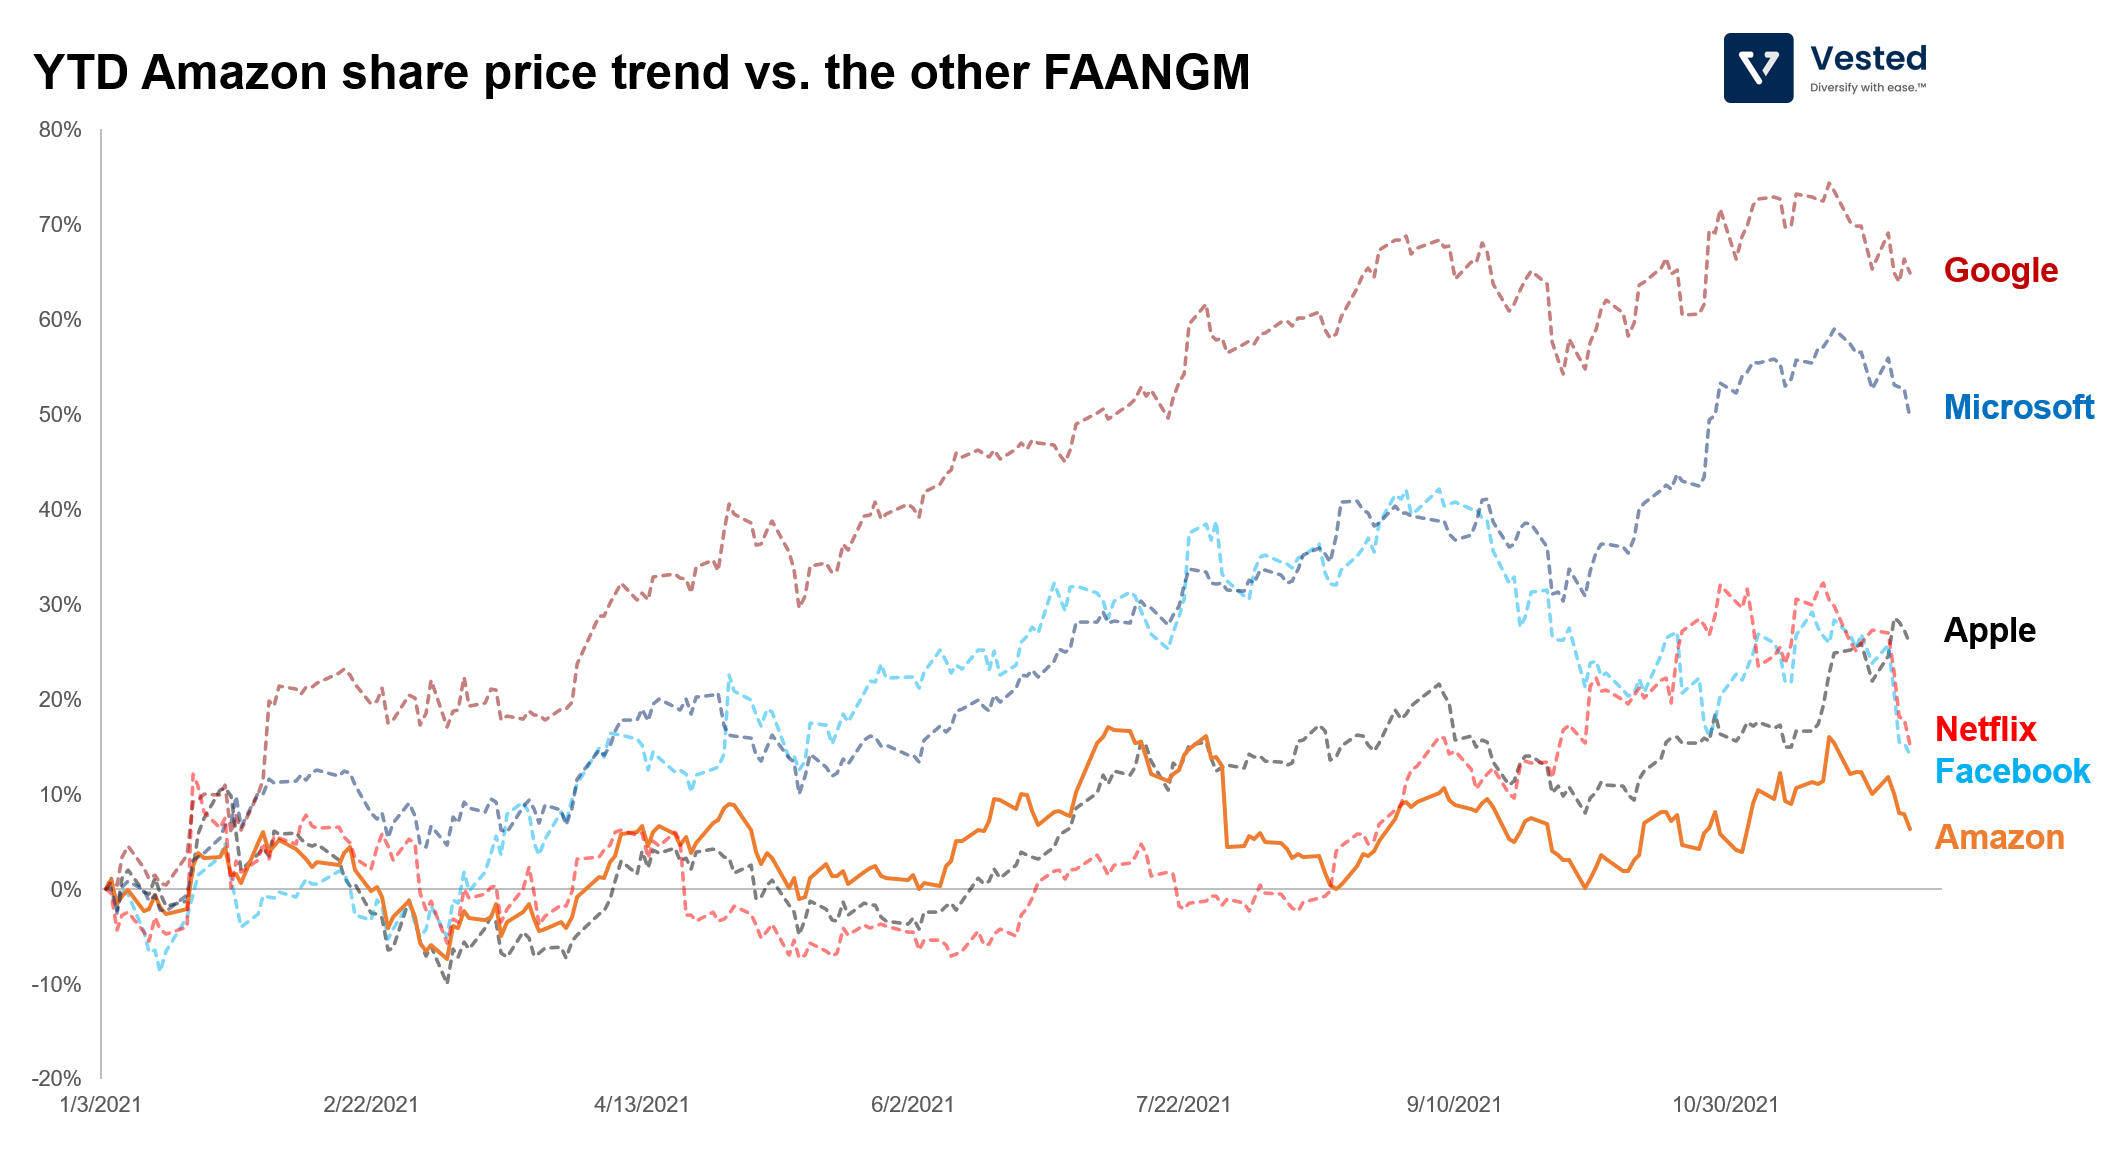 Year to date Amazon share price compared with Facebook, Apple, Google, and Microsoft